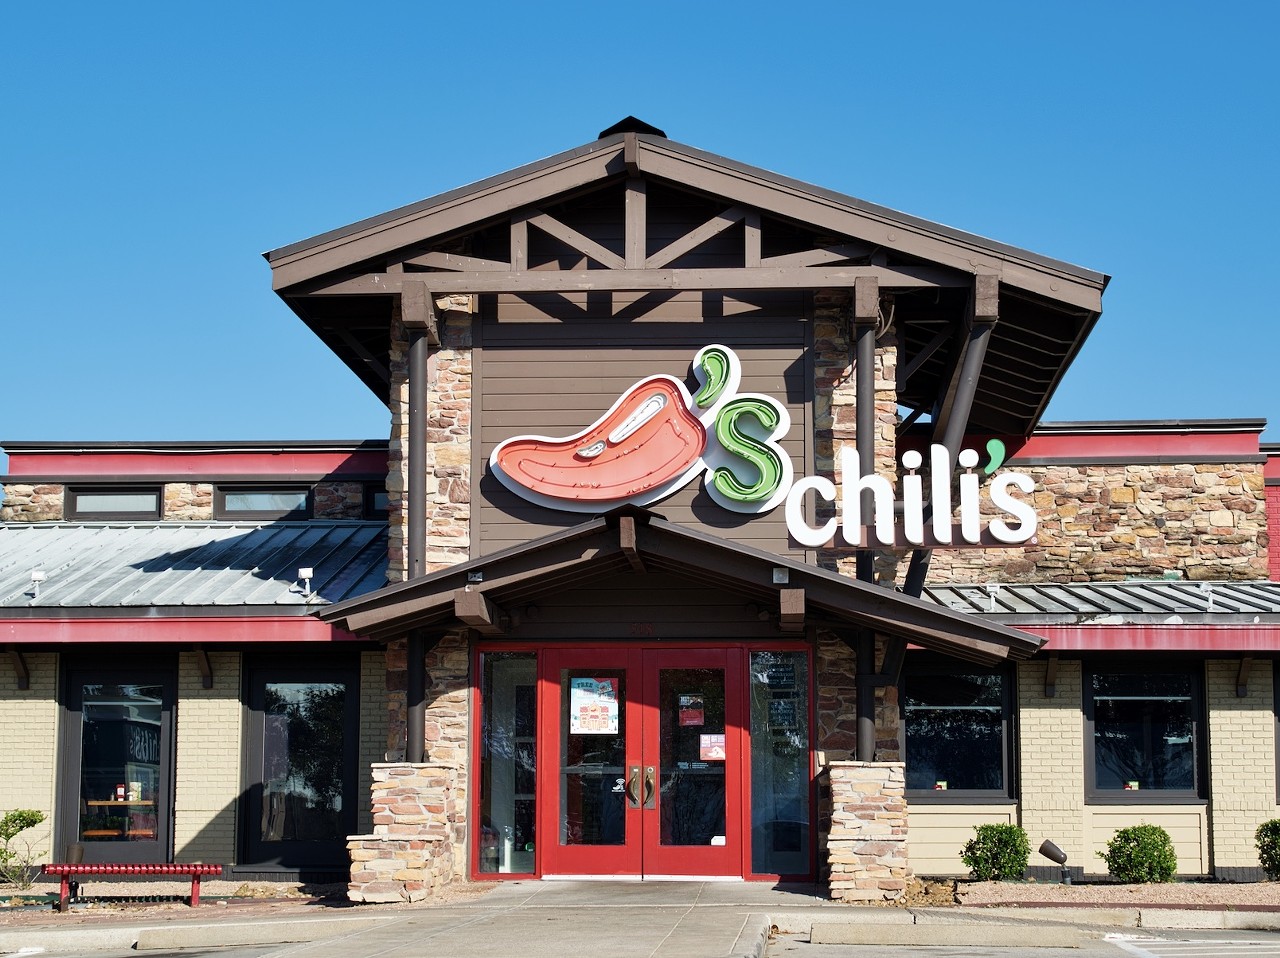 Chili’s
Multiple Locations, chilis.com
Chili’s was founded in 1975 in Dallas by Larry Lavine. It has since grown into an international chain with over 1,500 restaurants, although the chain’s headquarters remain in the DFW area.